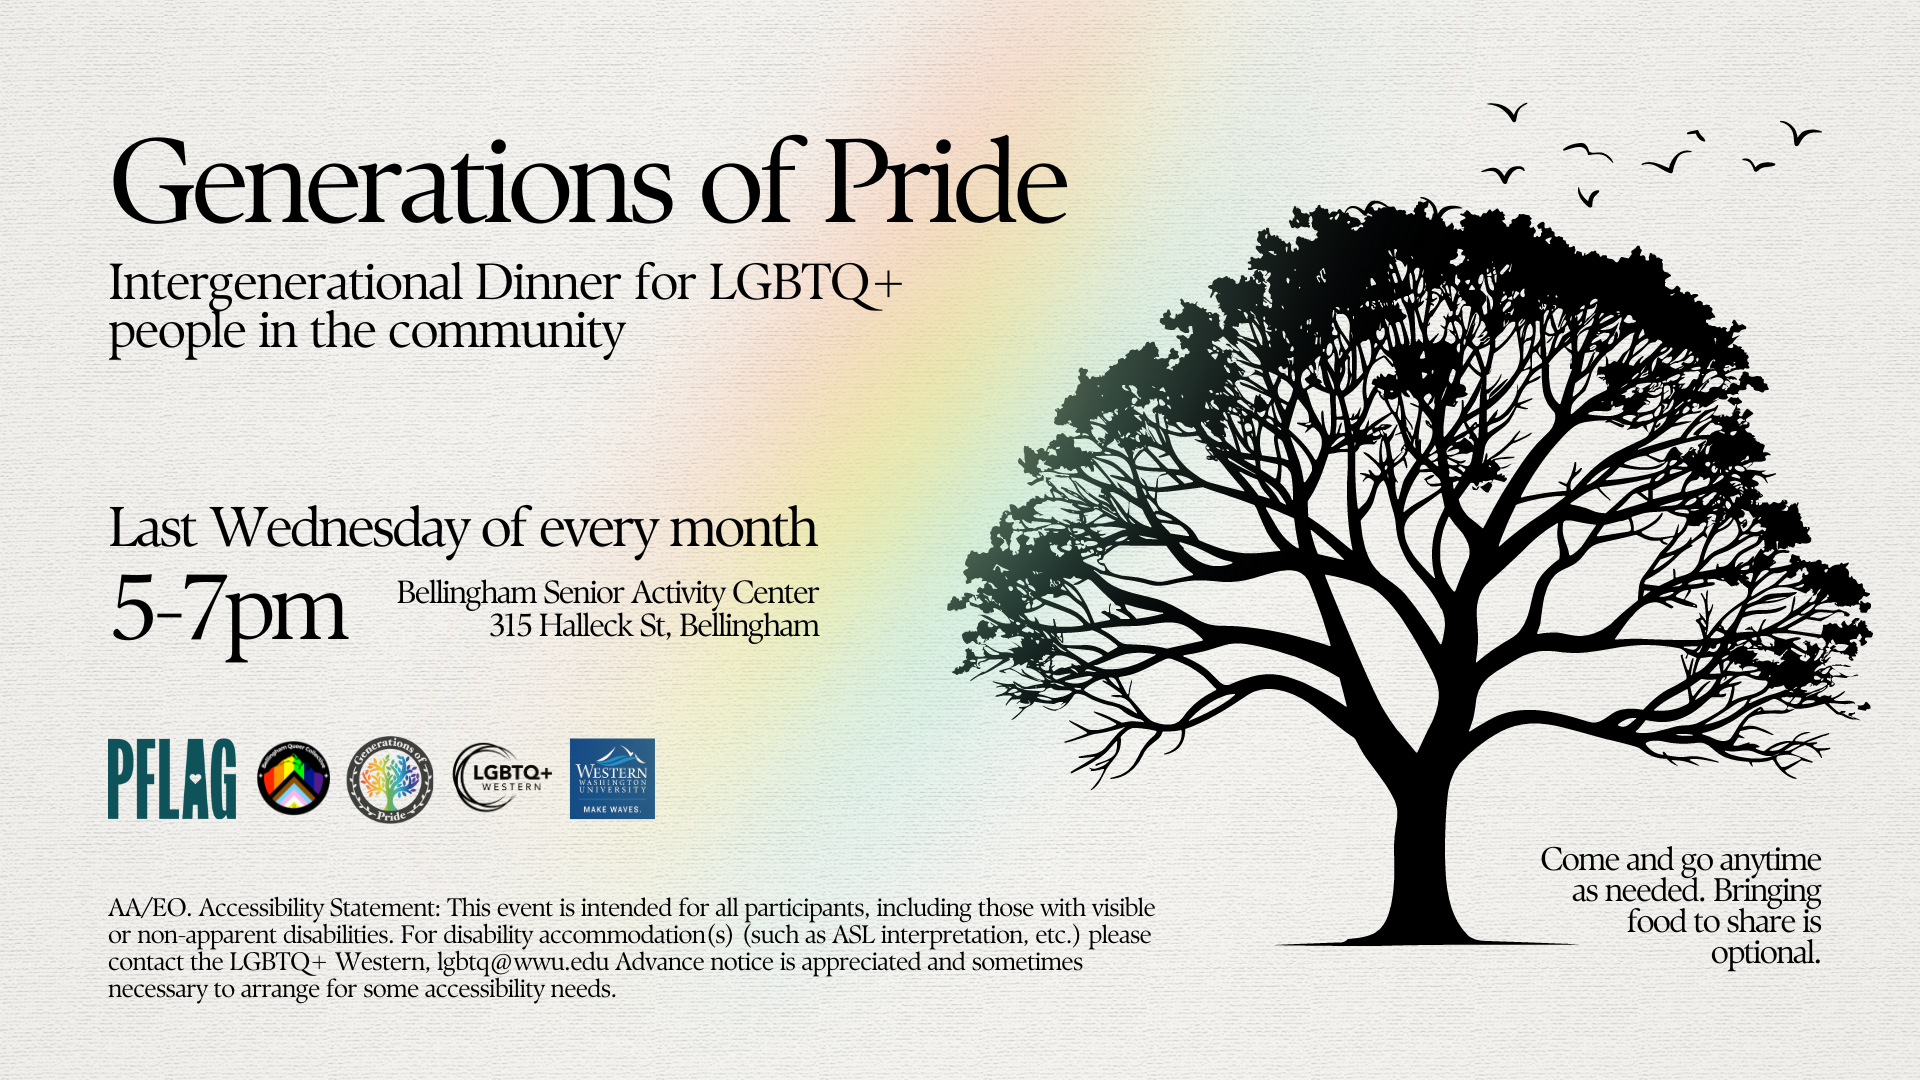 A black tree silhouette with birds and a rainbow on a beige background. Text is Generations of Pride. Intergenerational Dinners for LGBTQ+ People in the Community. Last Wednesday of every month. 5-7pm, Bellingham Senior Activity Center.